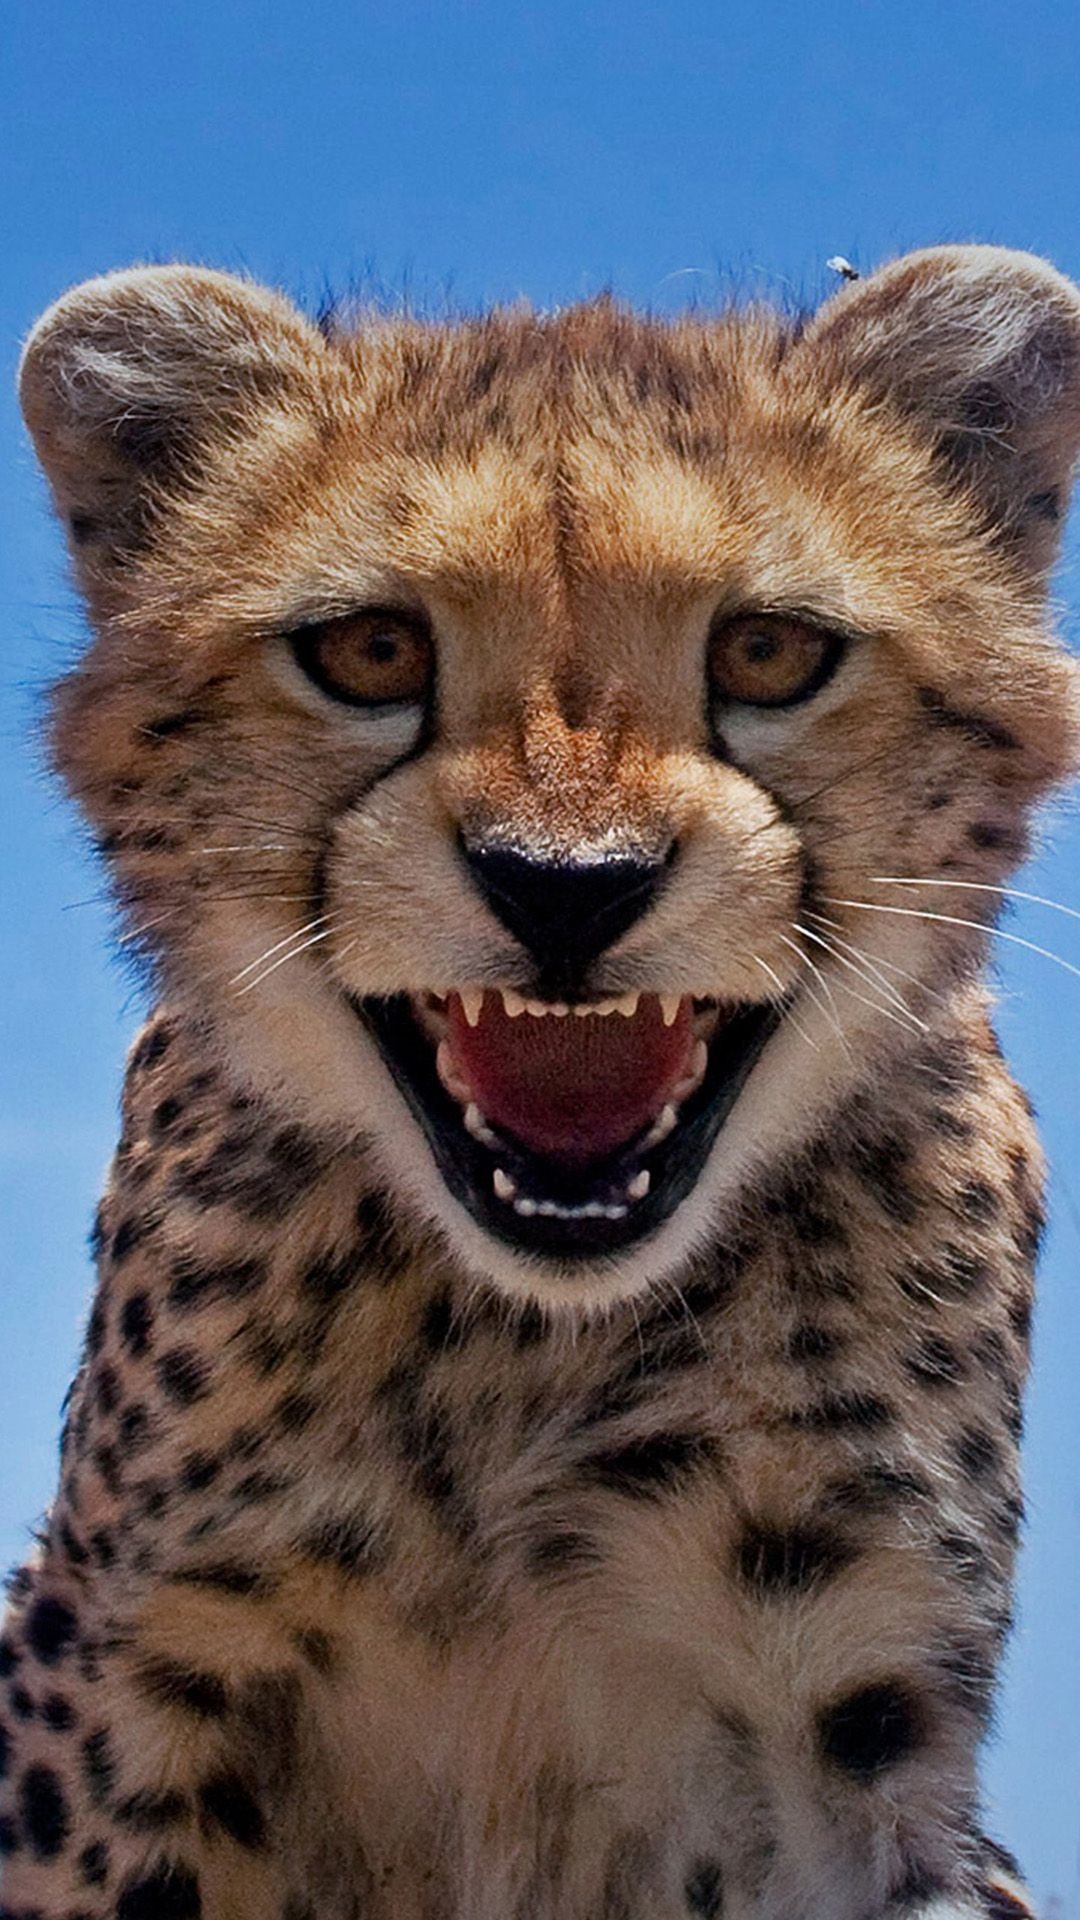 Baby cheetah wallpaper, Cute and innocent, Captivating and adorable, Precious wildlife, 1080x1920 Full HD Handy